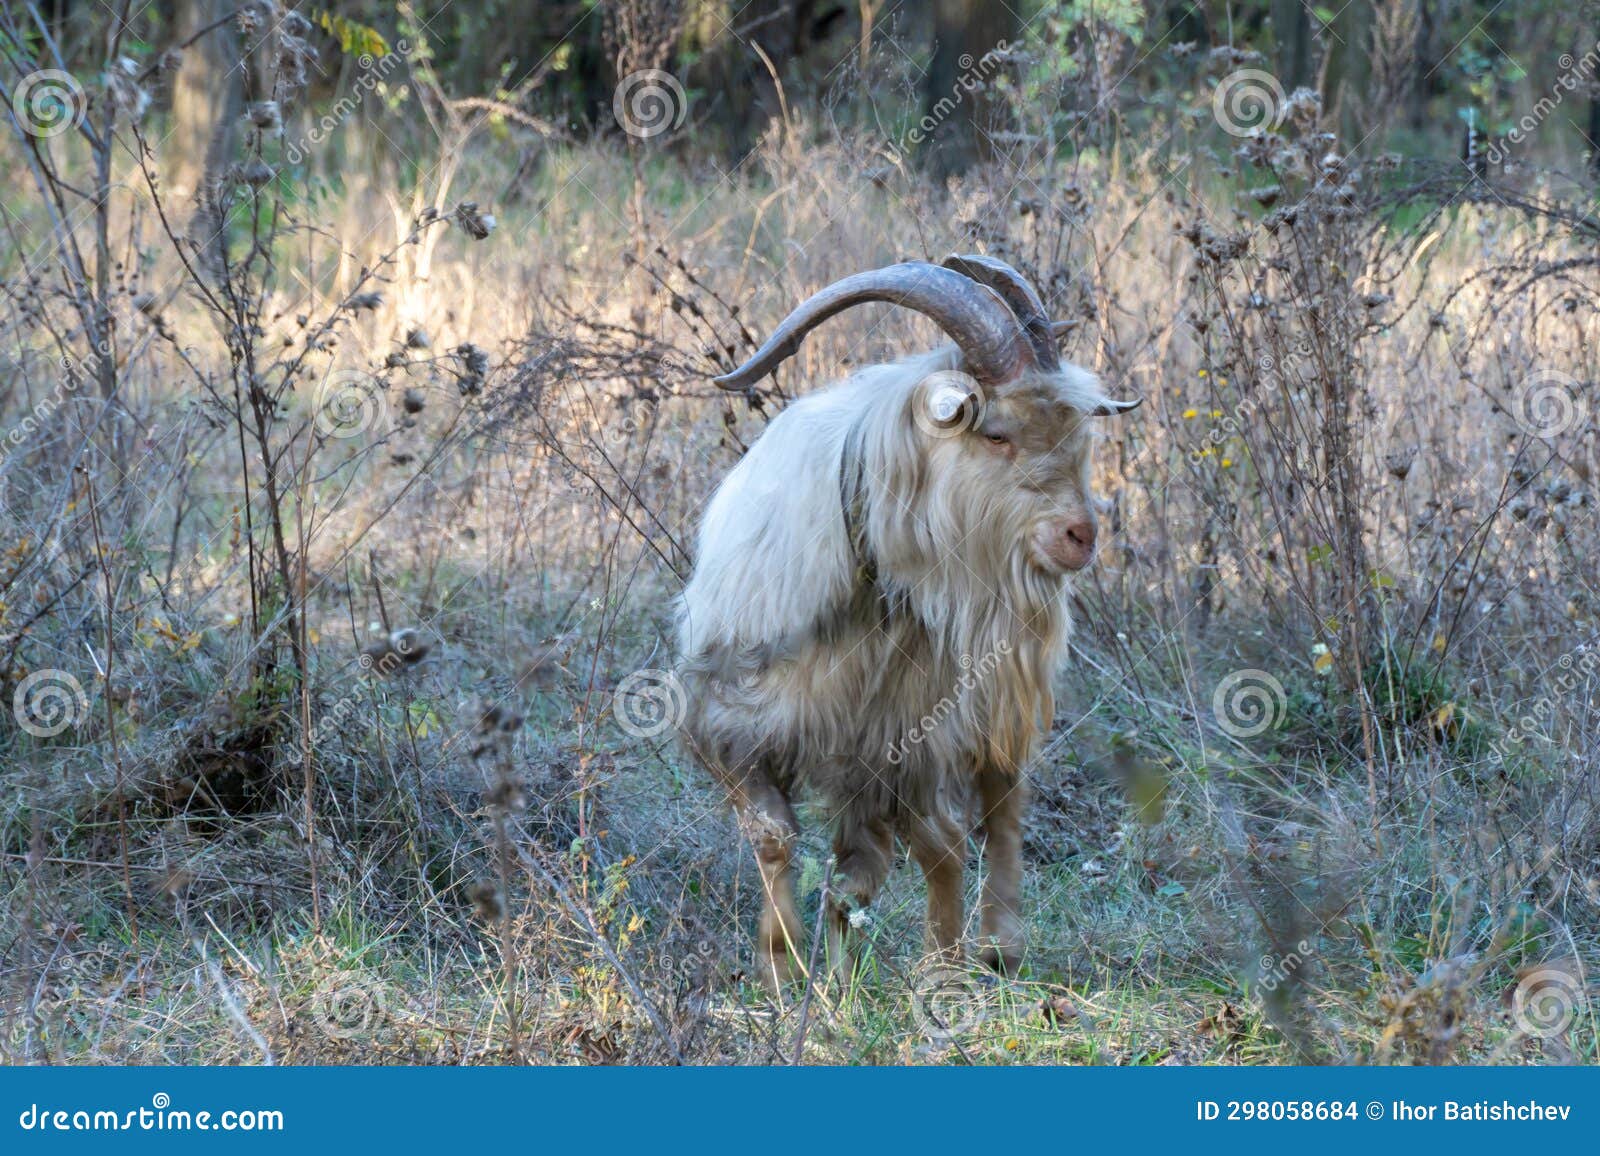 domestic male white goat with big horns grazing in pasture.